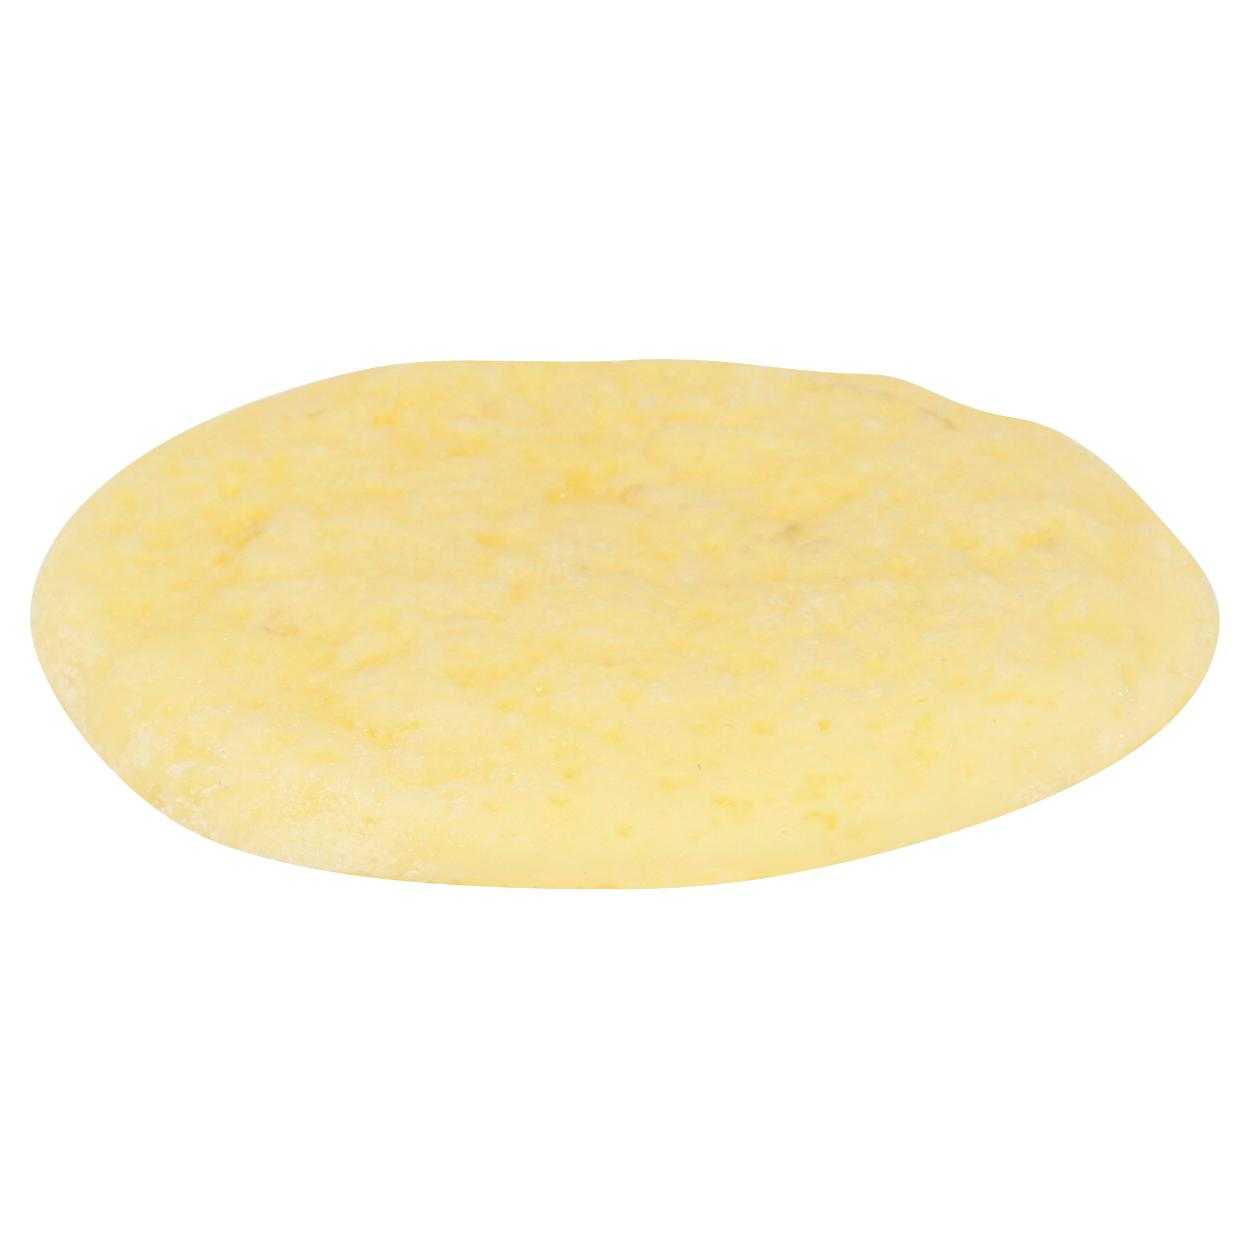 Papetti’s® Fully-Cooked 4” Round Scrambled Egg Patties with Medium Browning, 100/2.0 oz